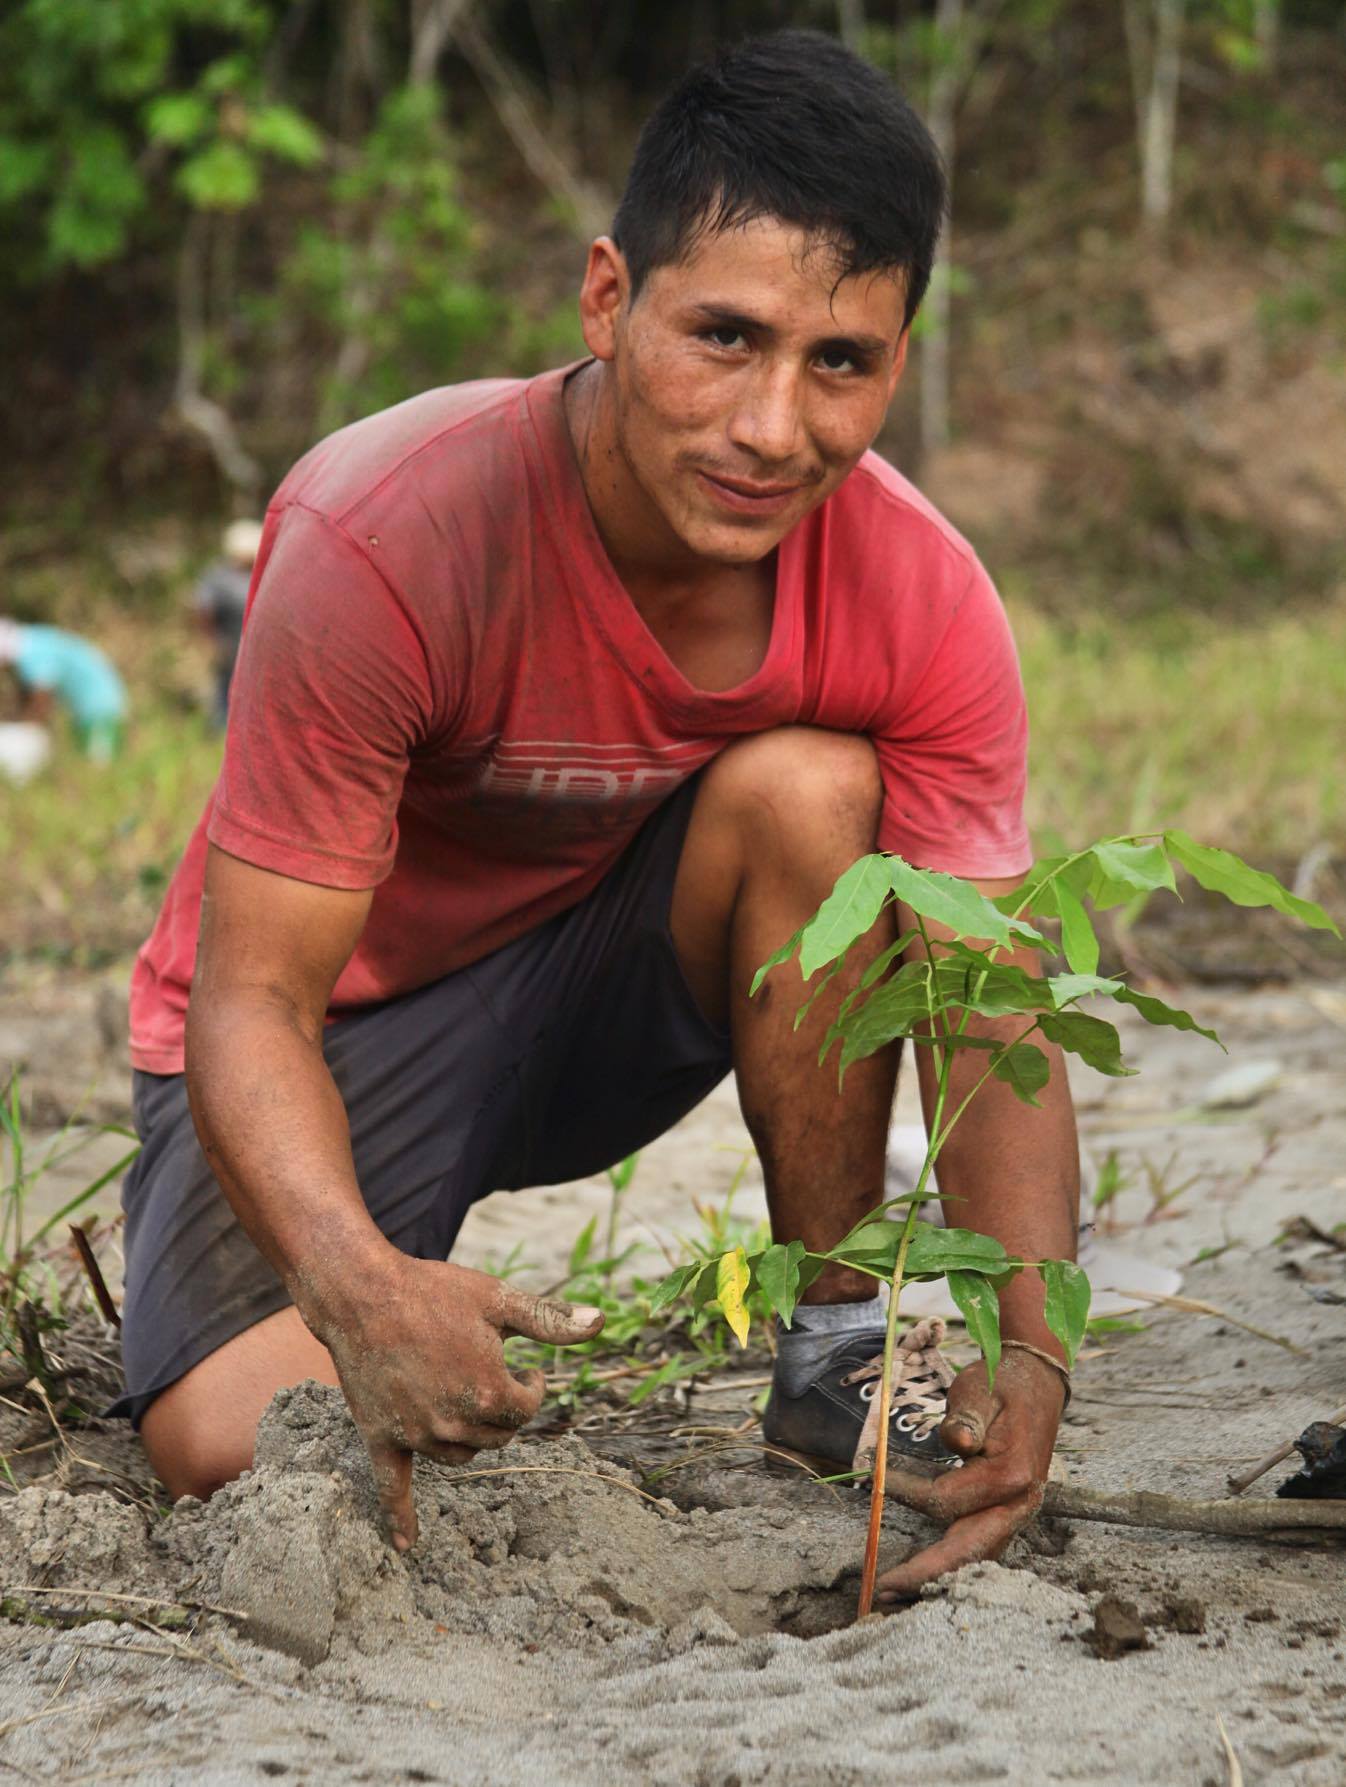 Restoring Rainforest Stripped By Gold Mining in the Amazon